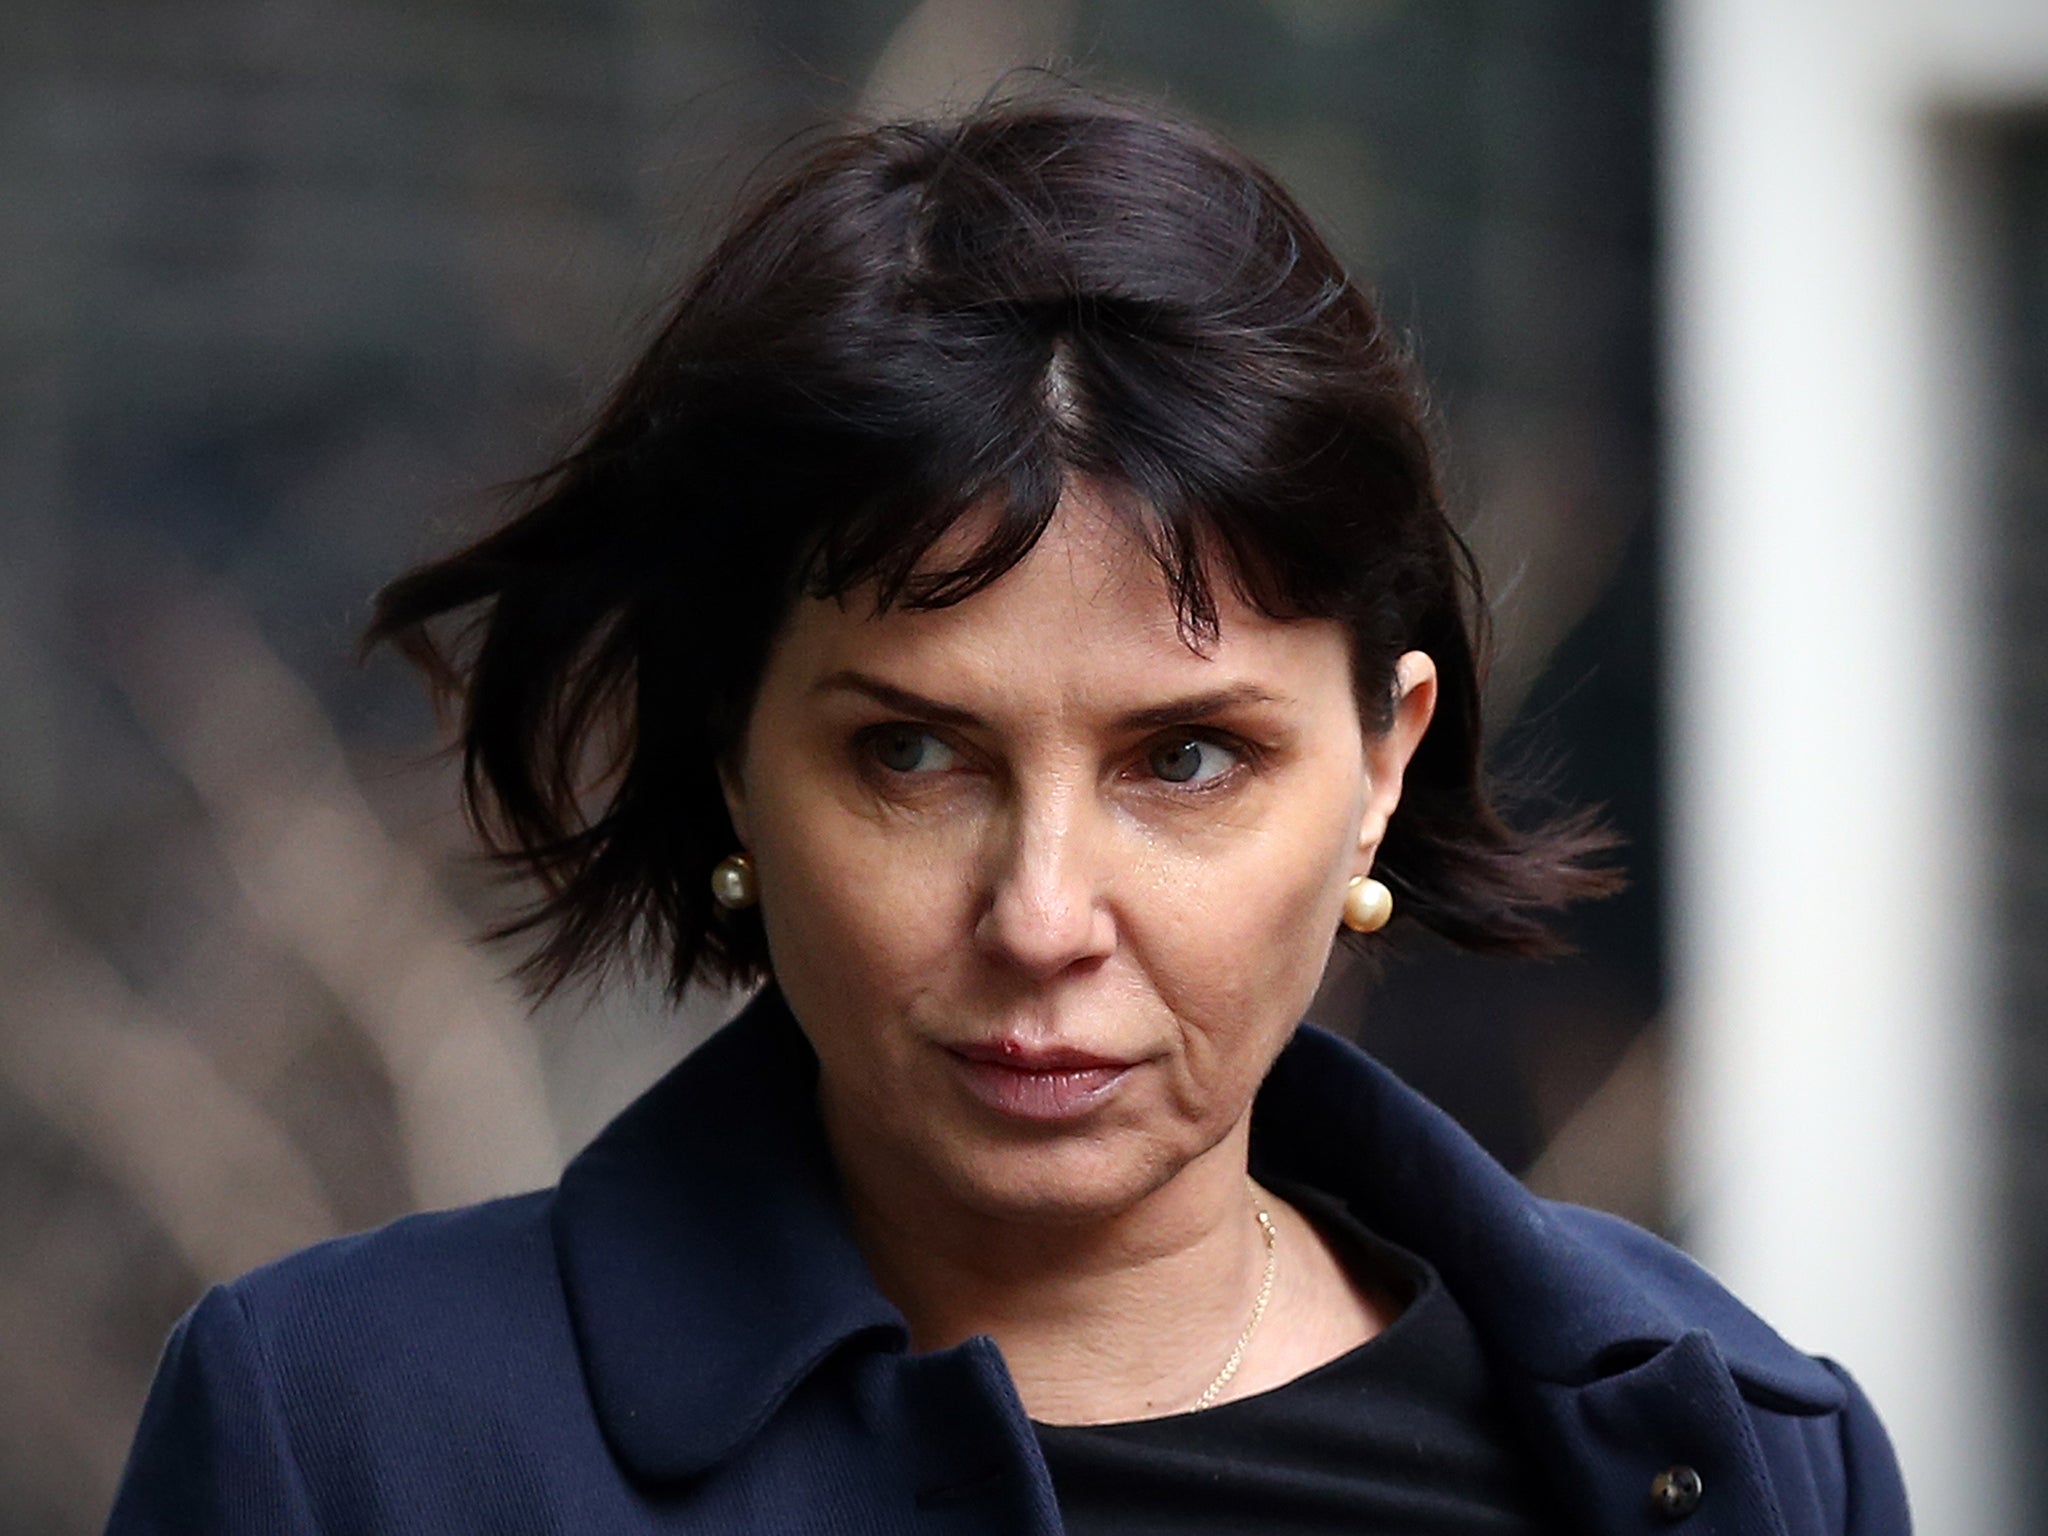 Actress and businesswoman Sadie Frost received the largest damages sum of £260,250